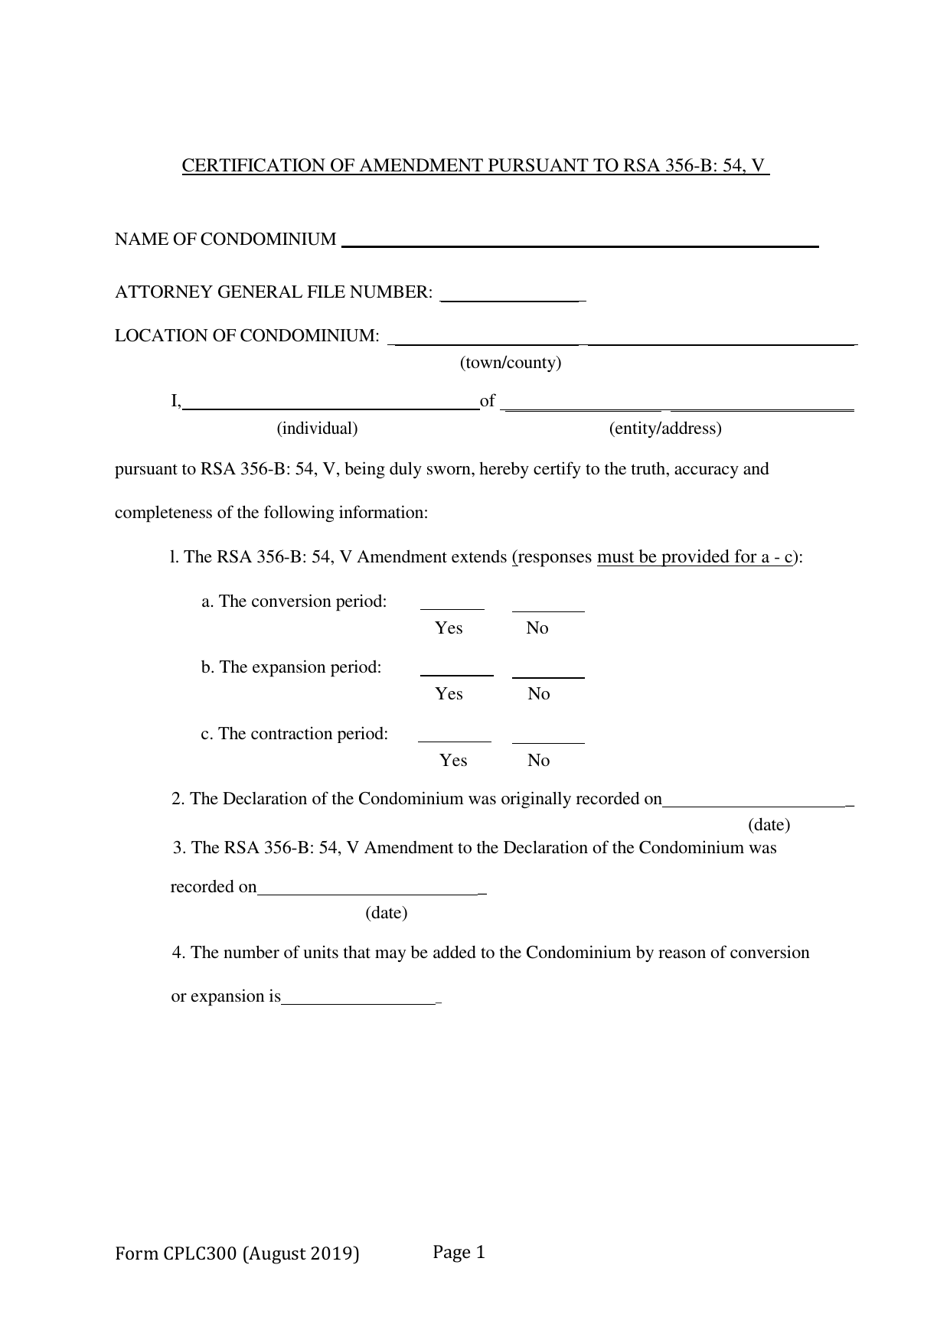 Form CPLC300 Certification of Amendment Pursuant to Rsa 356-b: 54, V - New Hampshire, Page 1